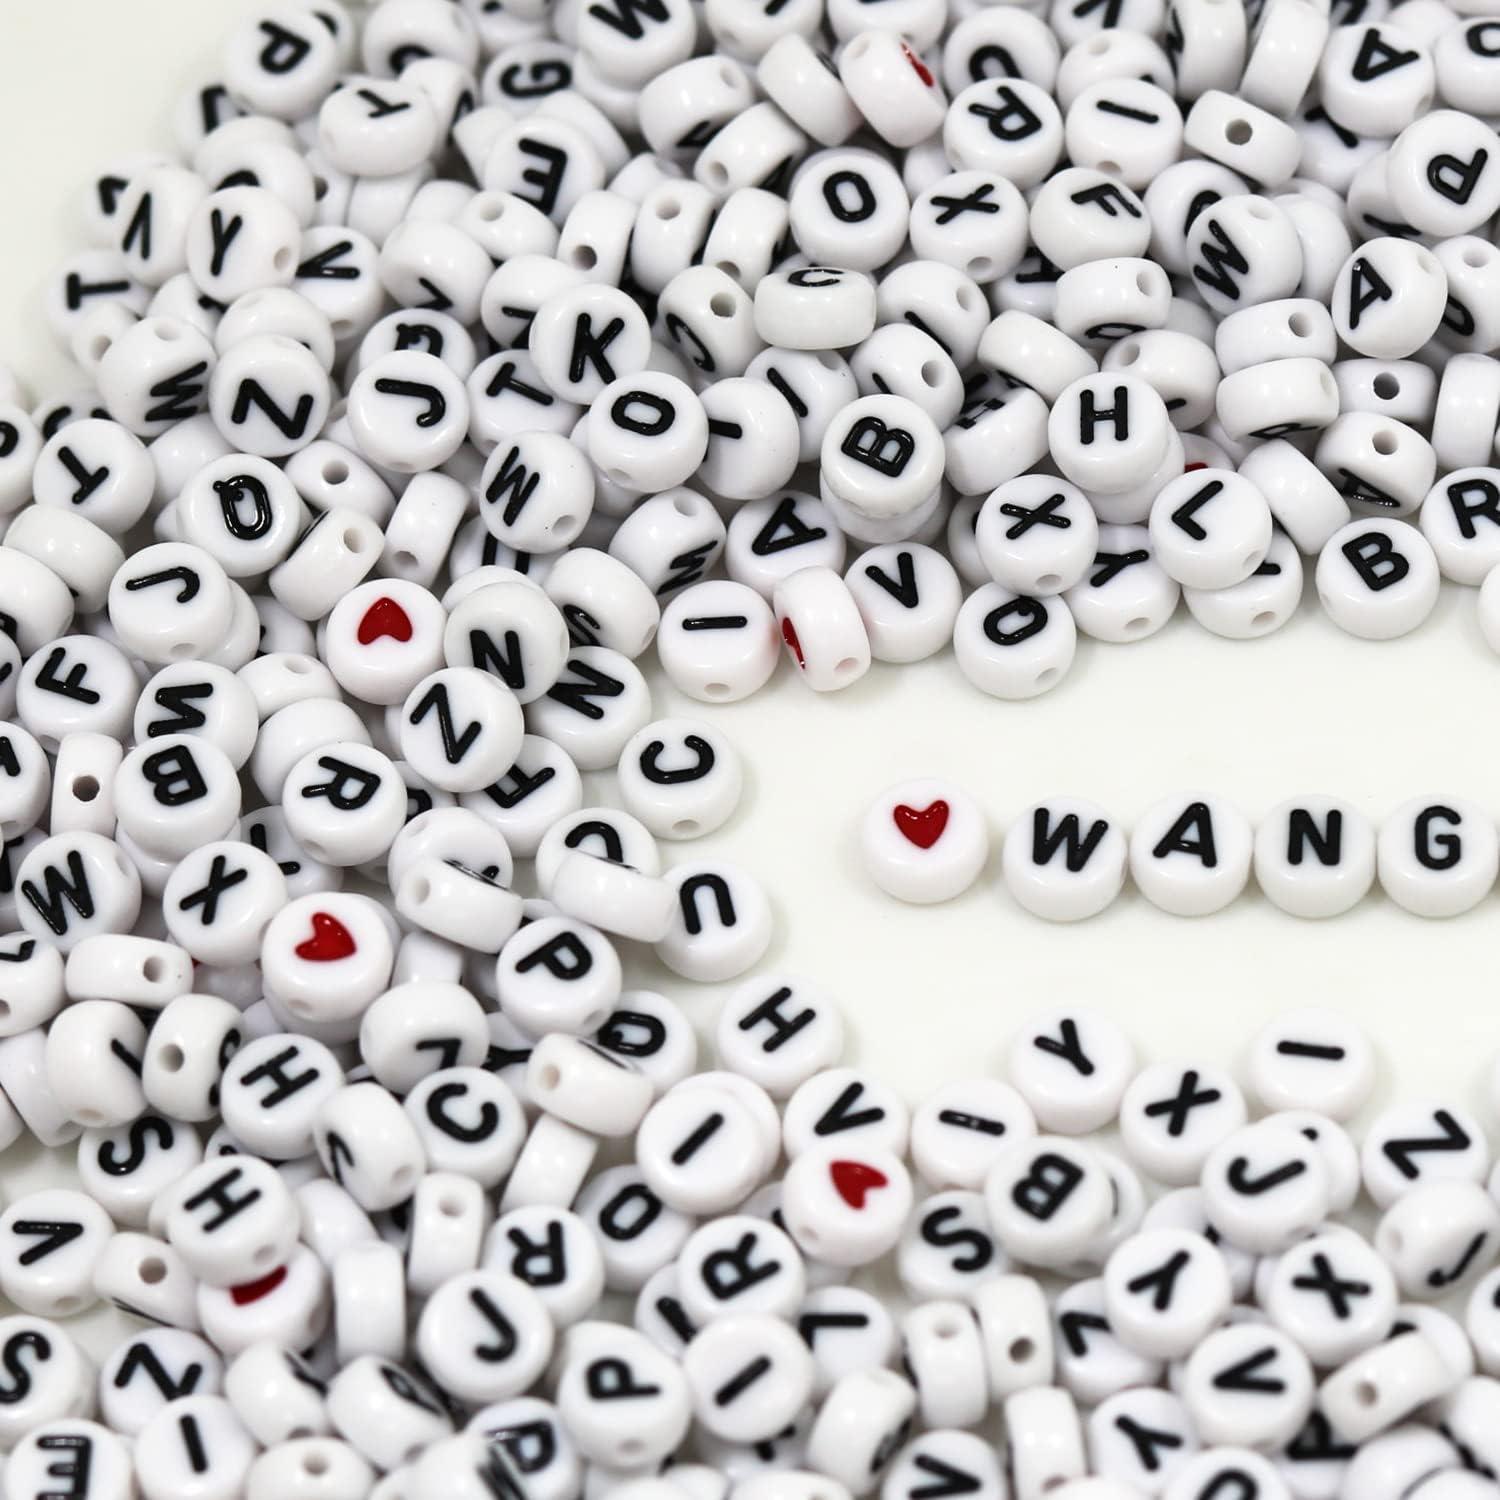 WangLaap 1450Pcs Letter Beads, Acrylic 4x7mm Round Letter Beads Kits, Alphabet  Beads A-Z and Red Heart Black Star Beads for Bracelets Necklaces DIY Jewelry  Making (White)